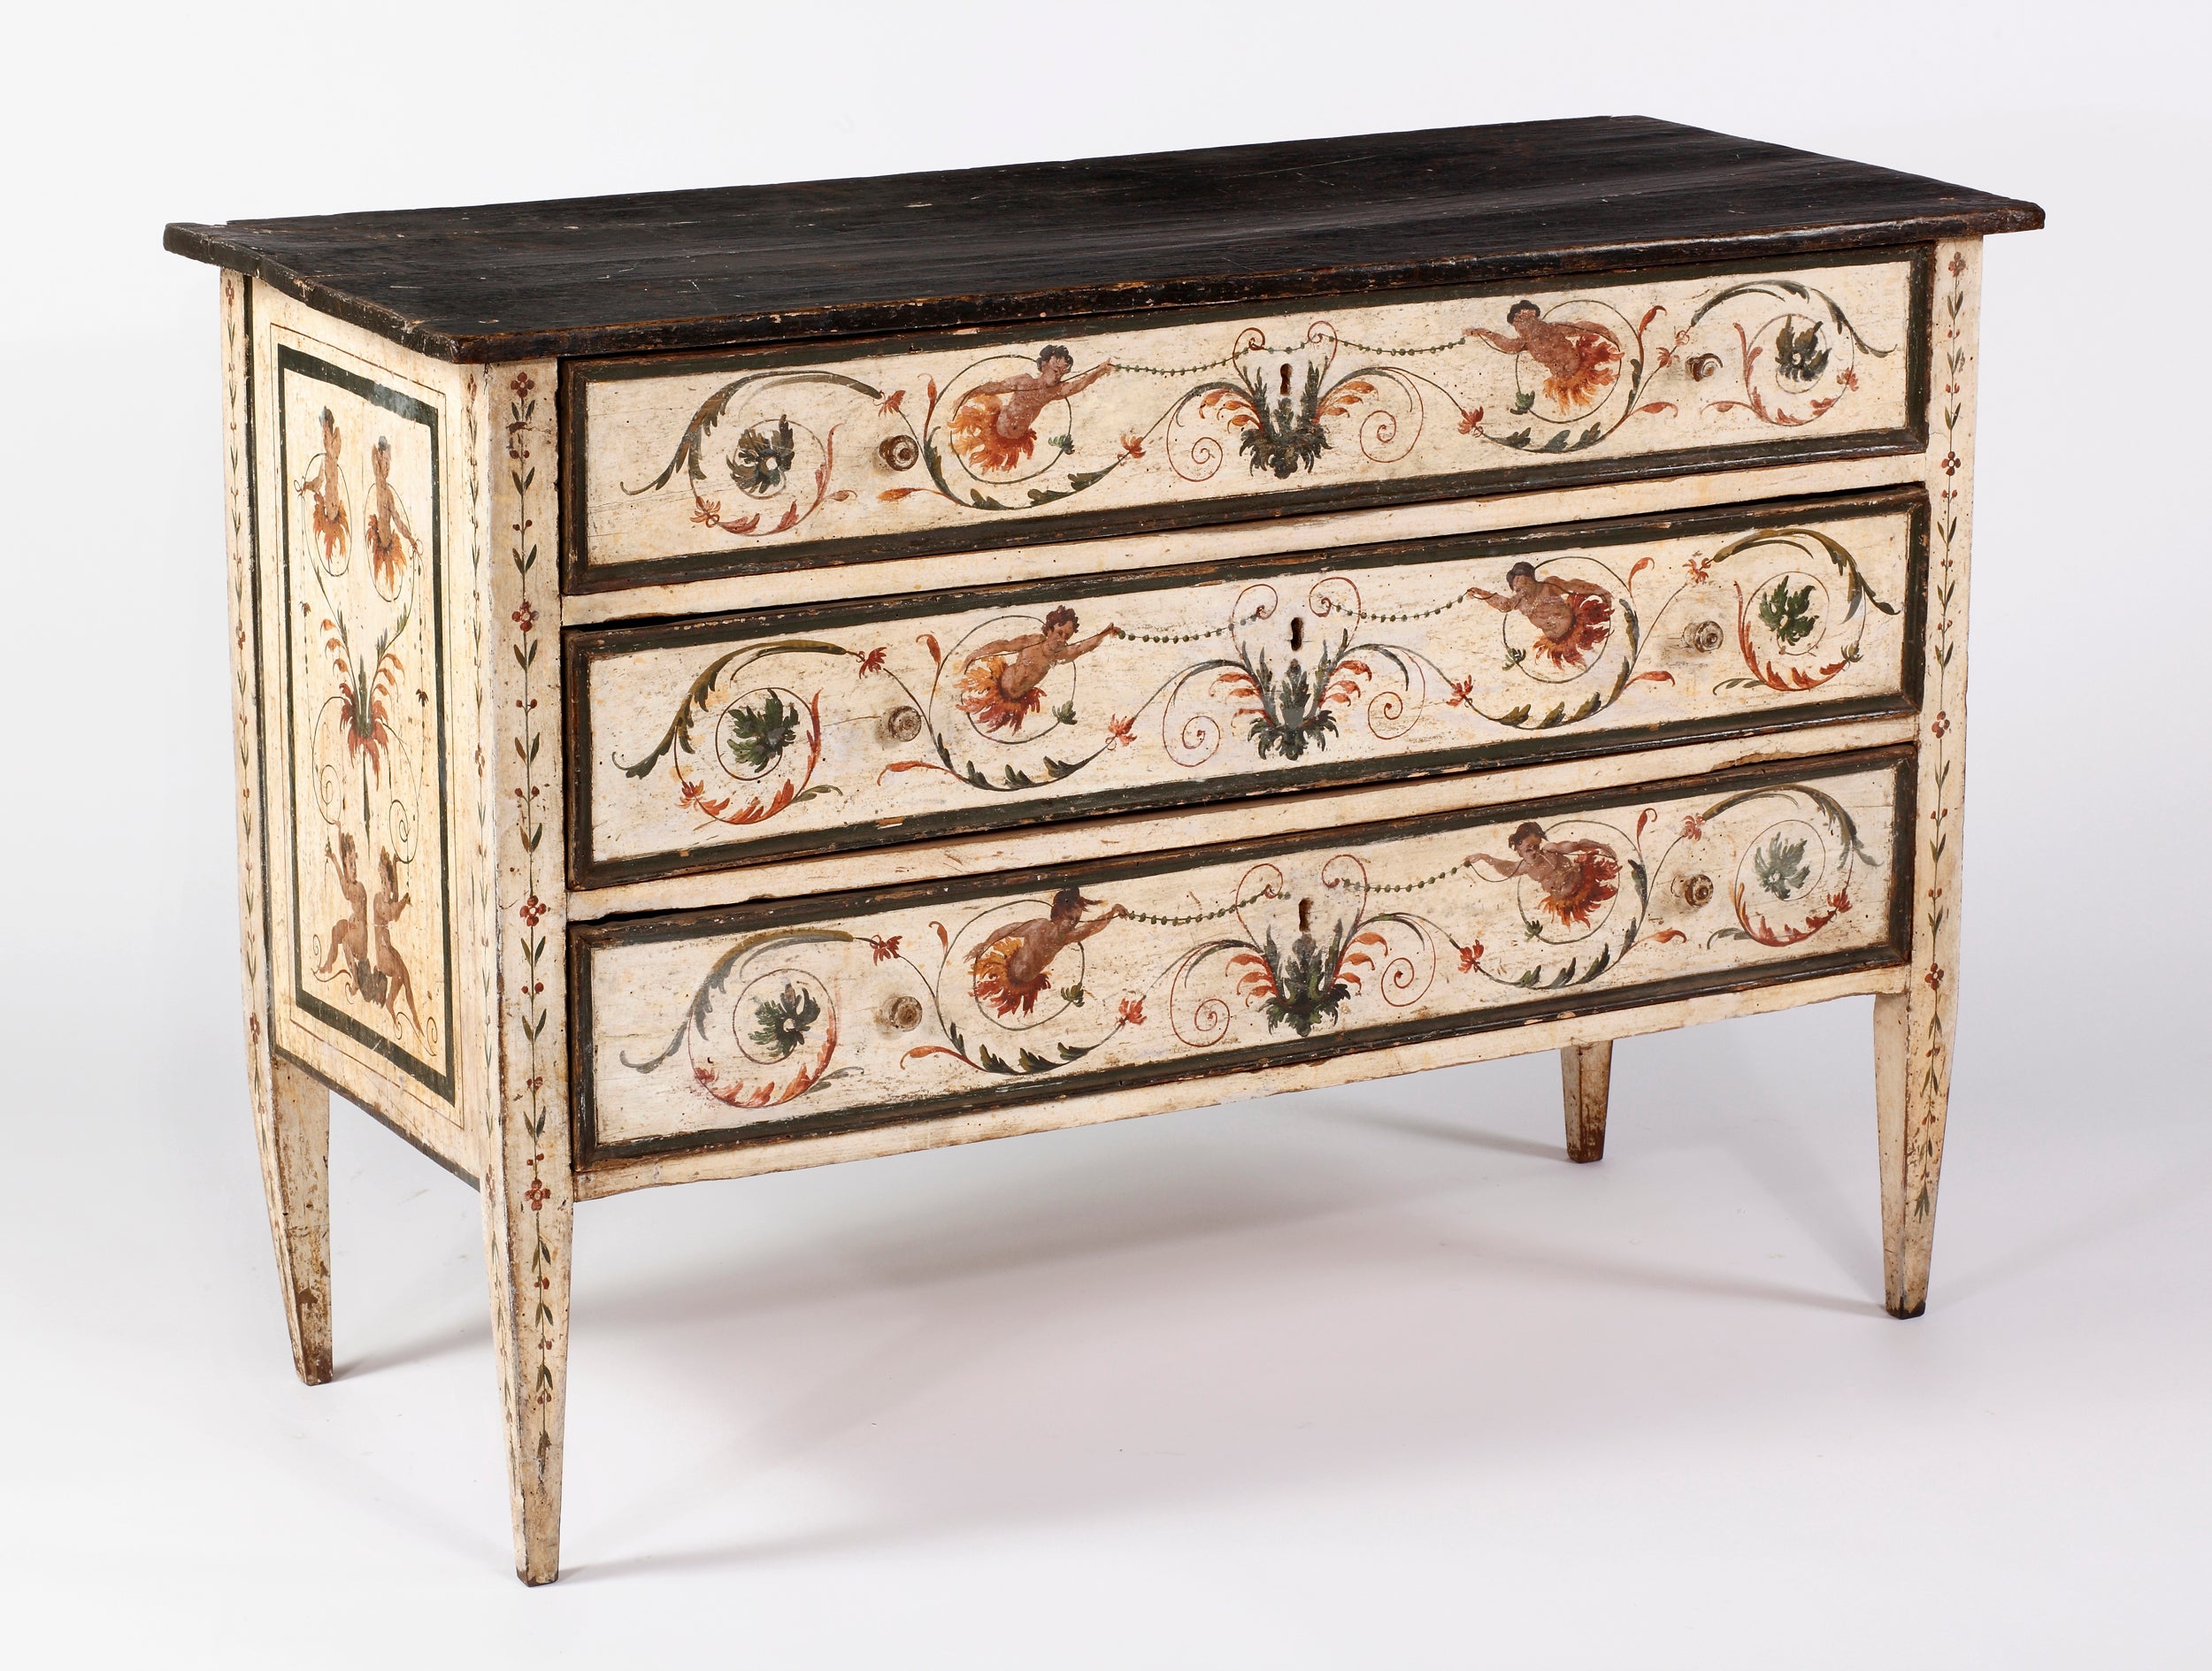 An Italian Polychrome-Painted & Faux-Marble Top Neoclassic Commode, 18th Century